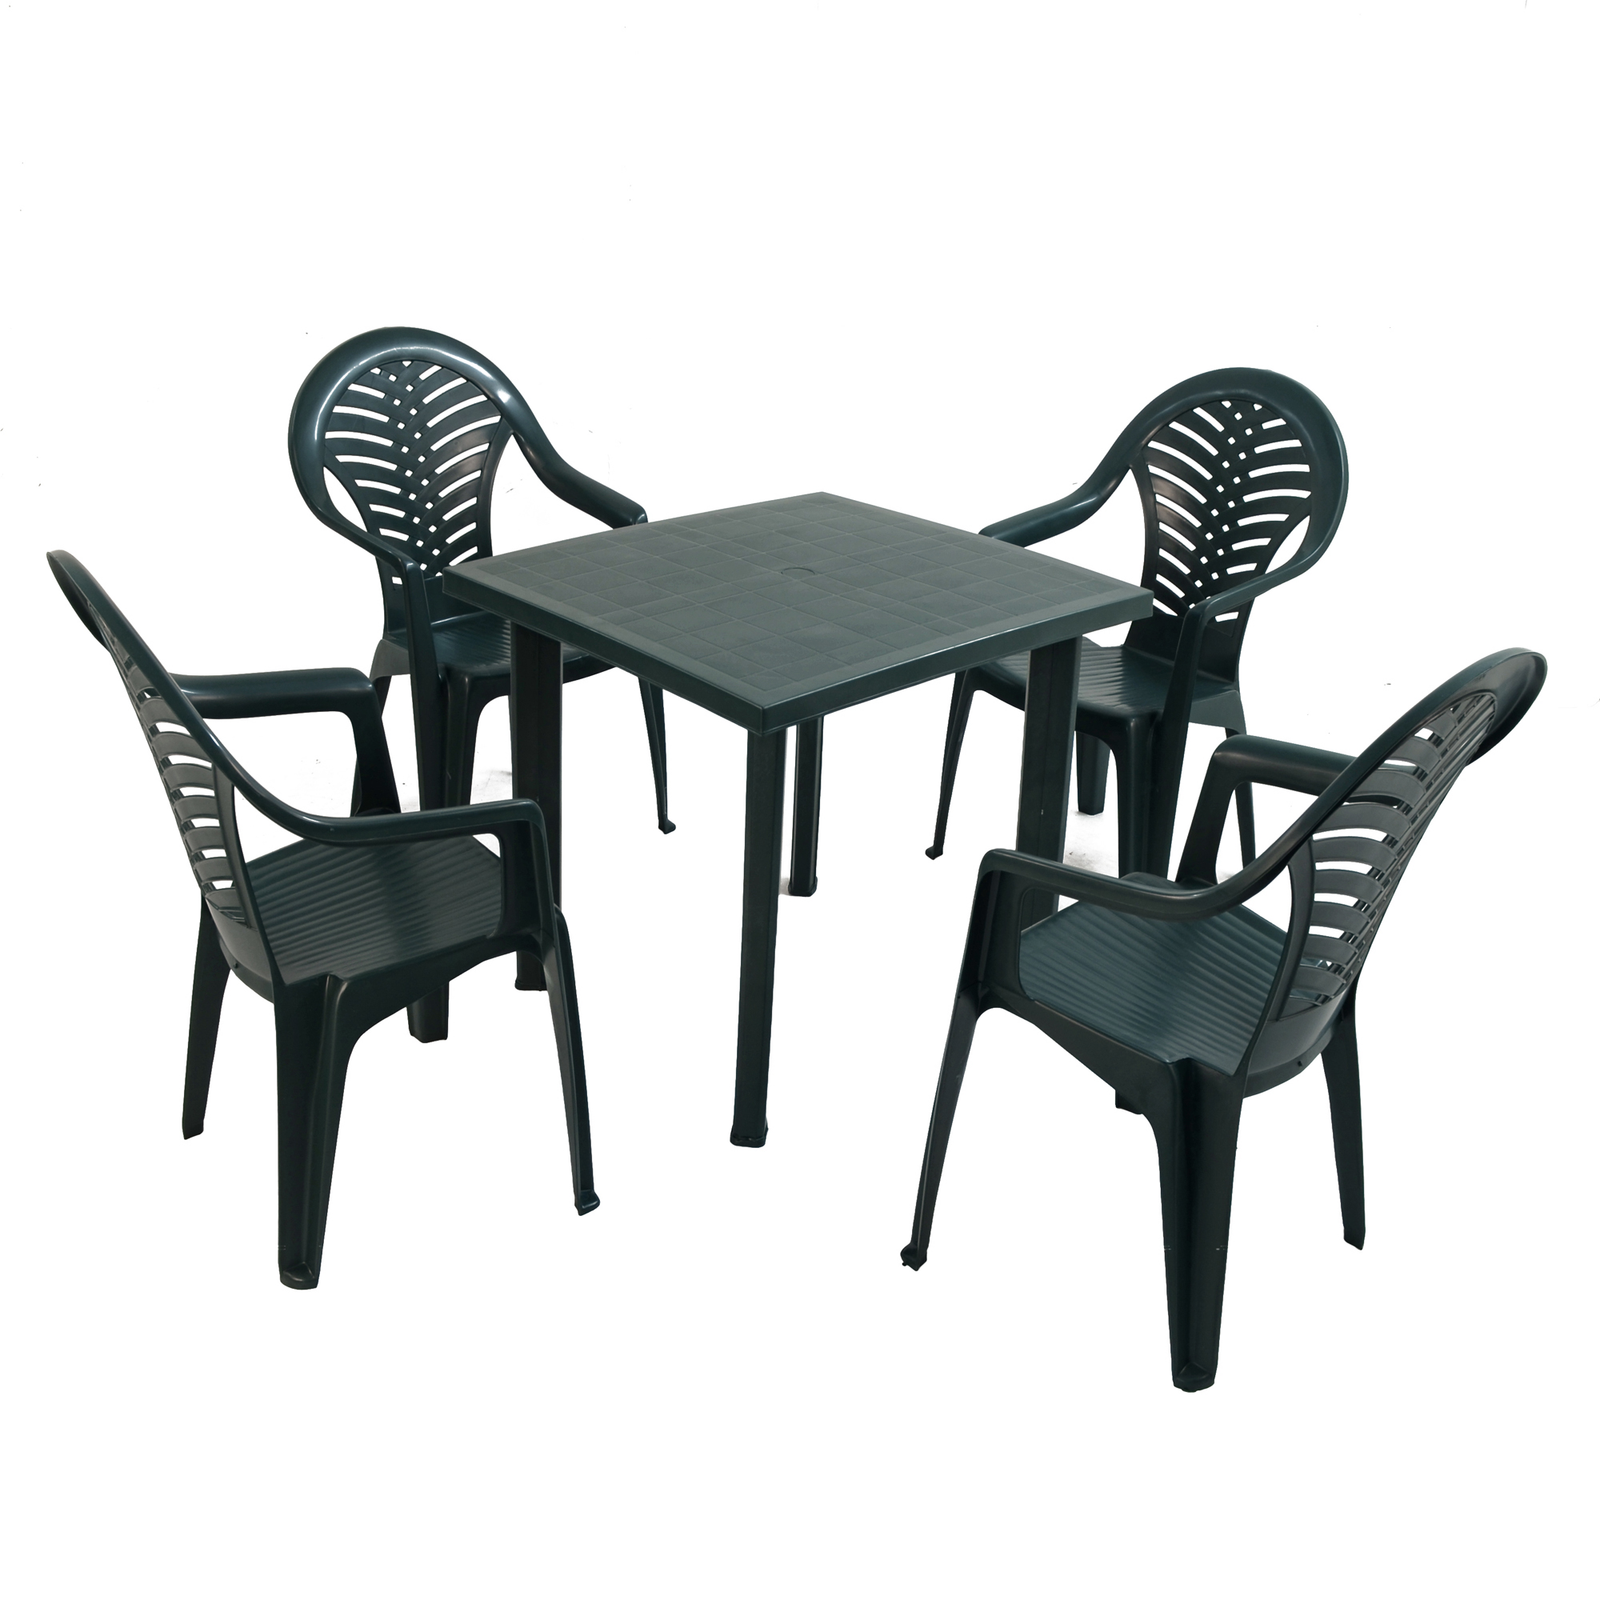 Trabella Rapino Square Table With 4 Pineto Chairs Set Green Dining Sets Trabella   